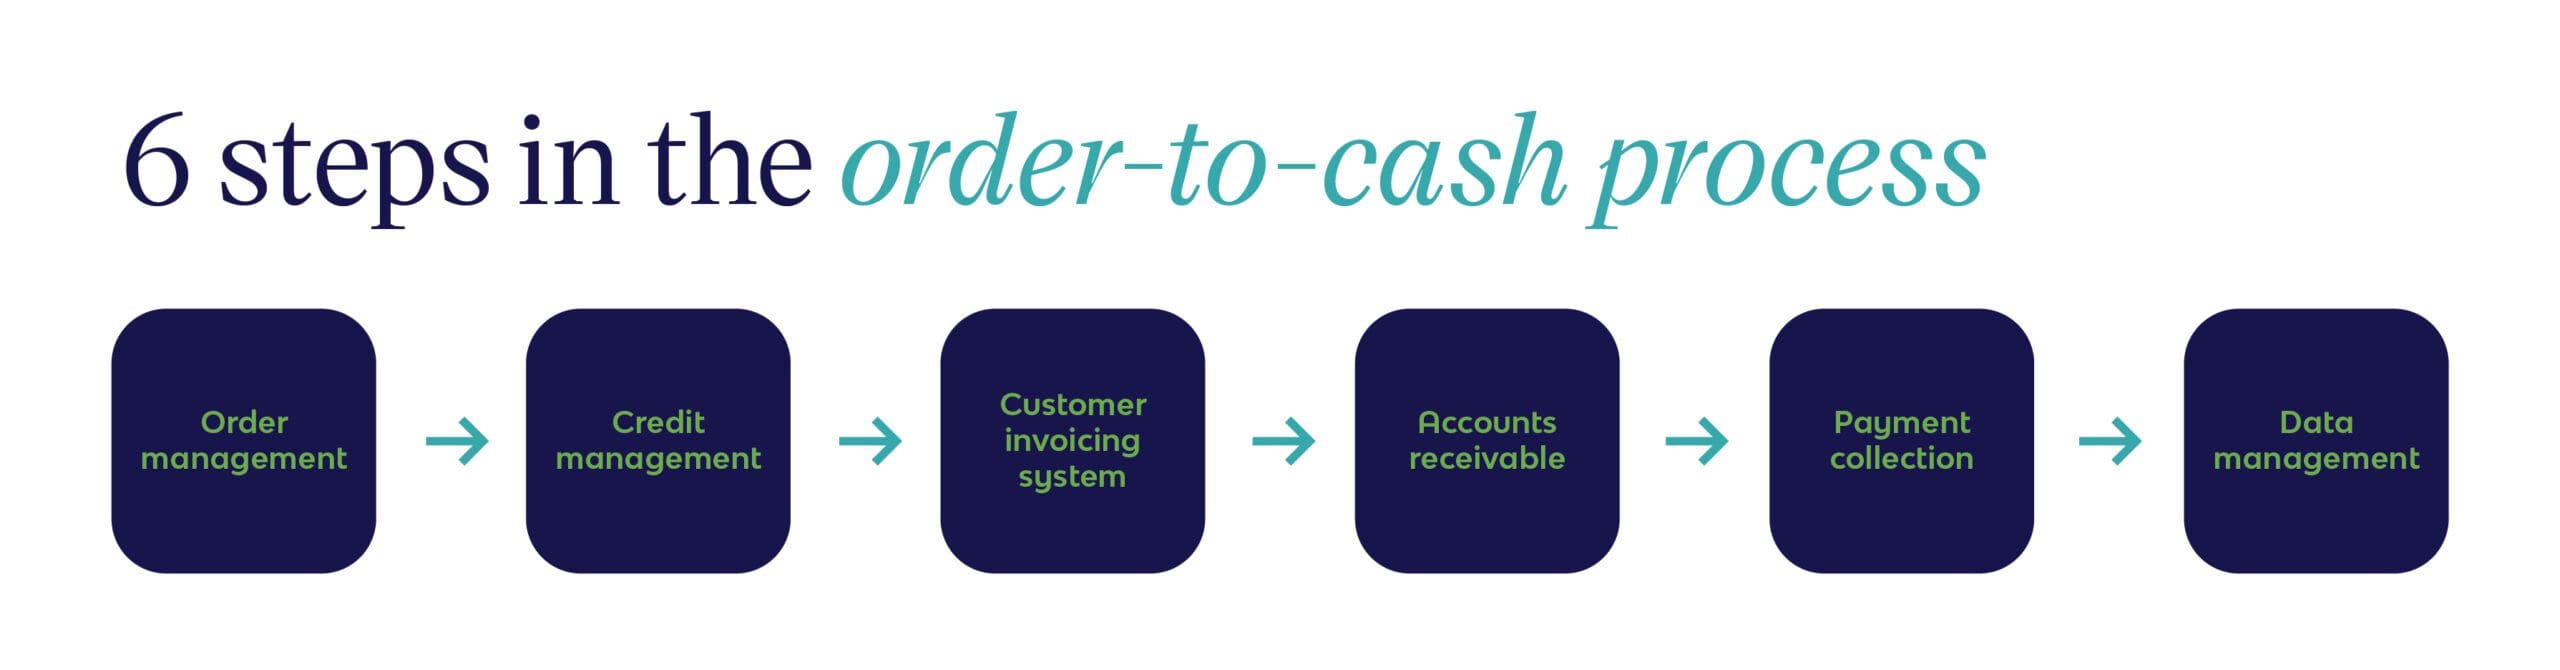 Order to cash process, from order and credit management to invoicing system, AR, payment collection, and data management.